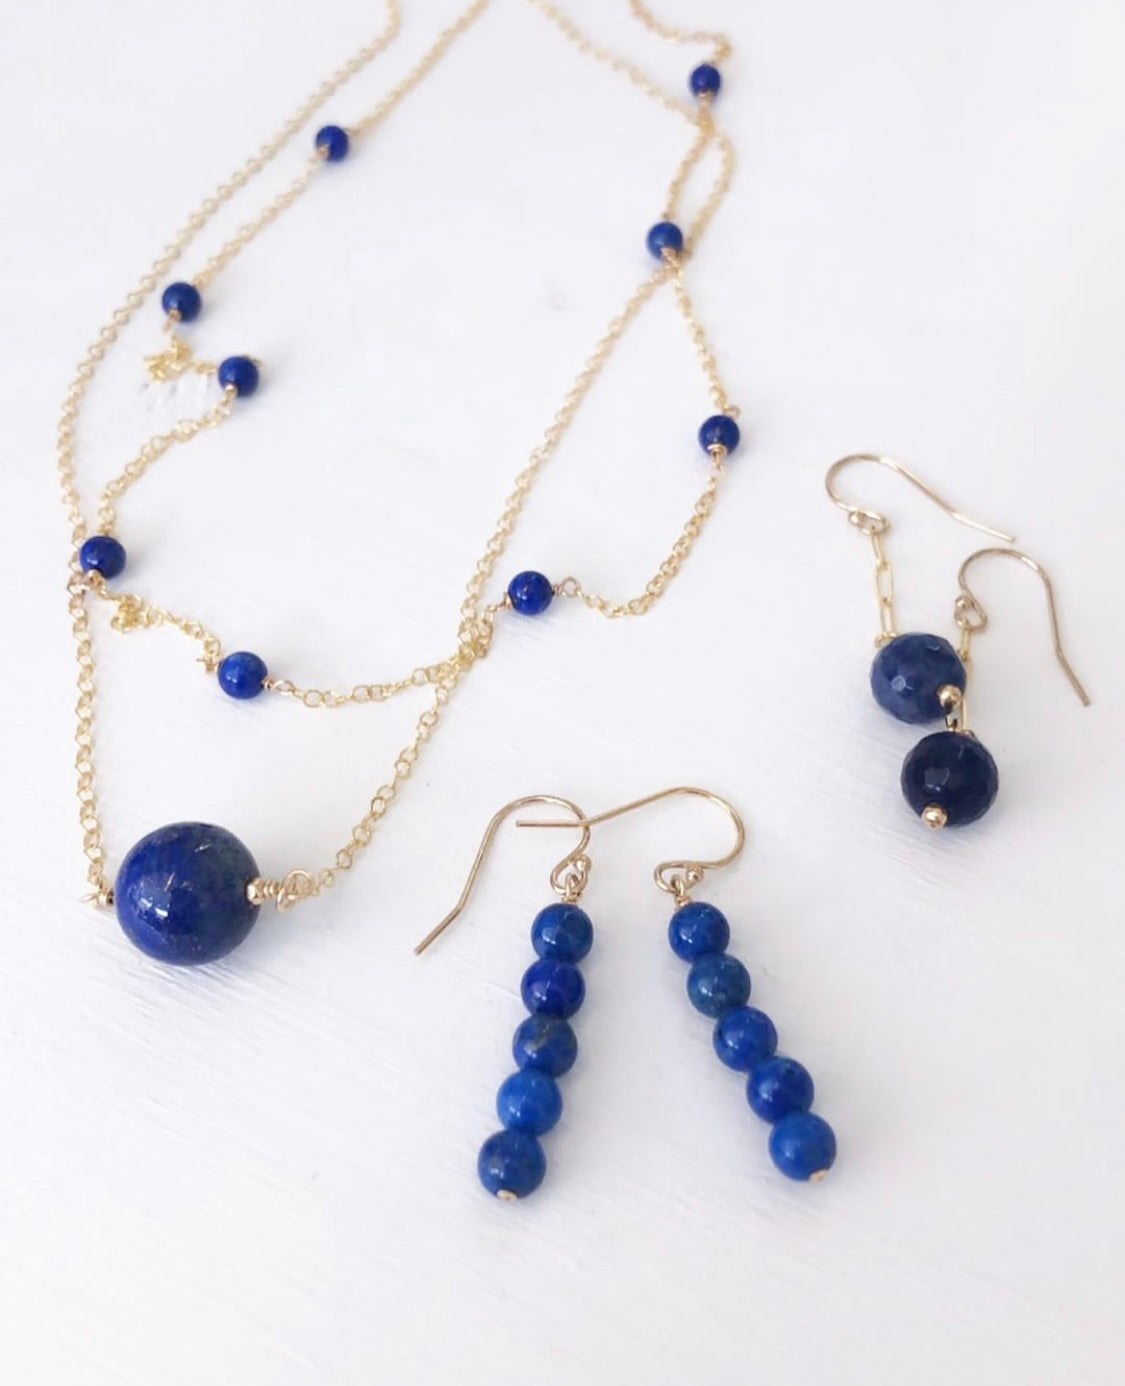 Three 14k gold filled chain necklace with lapis beads lay on a white background.